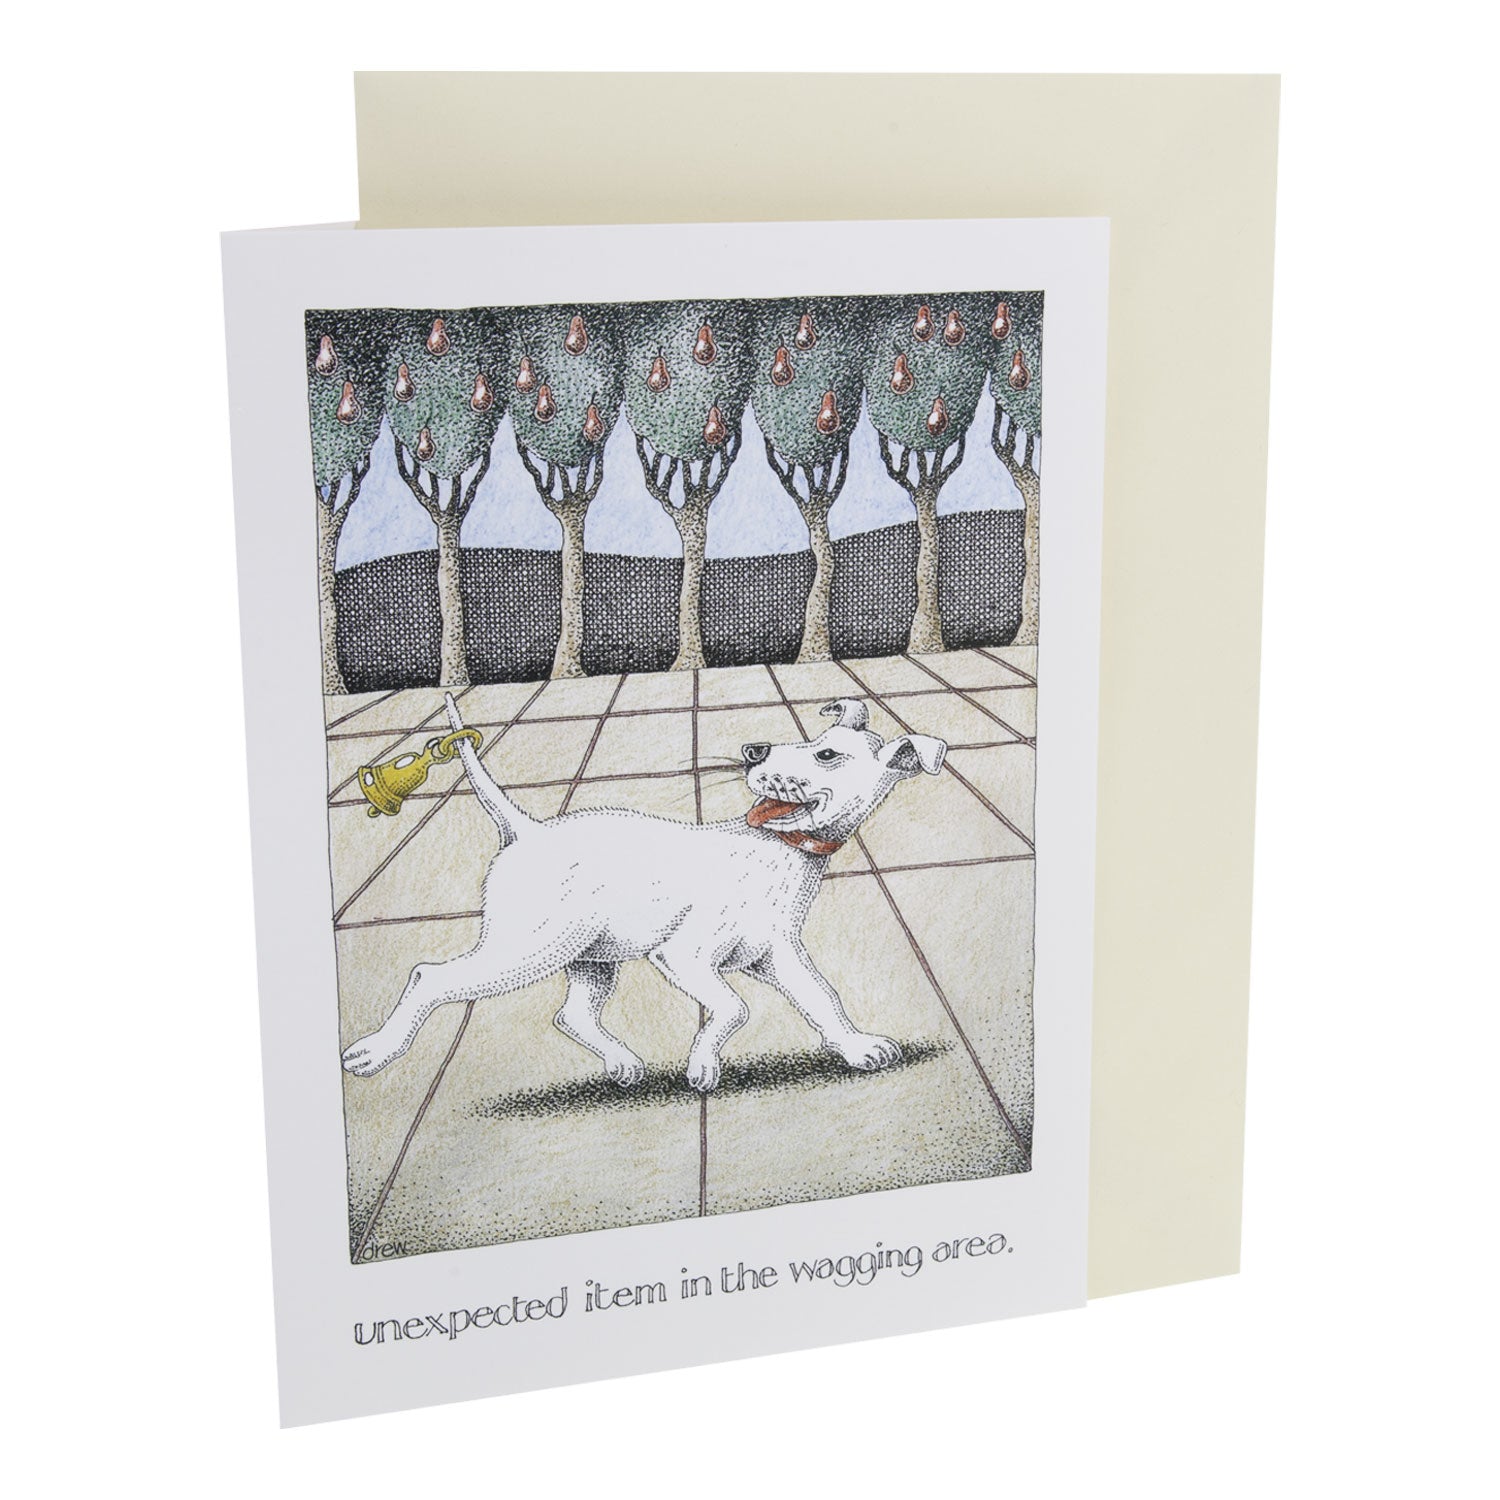 DogKrazyGifts – Simon Drew Wagging Area Card Humorous card Part of the Simon Drew Dog Collection available from Dog Krazy Gifts